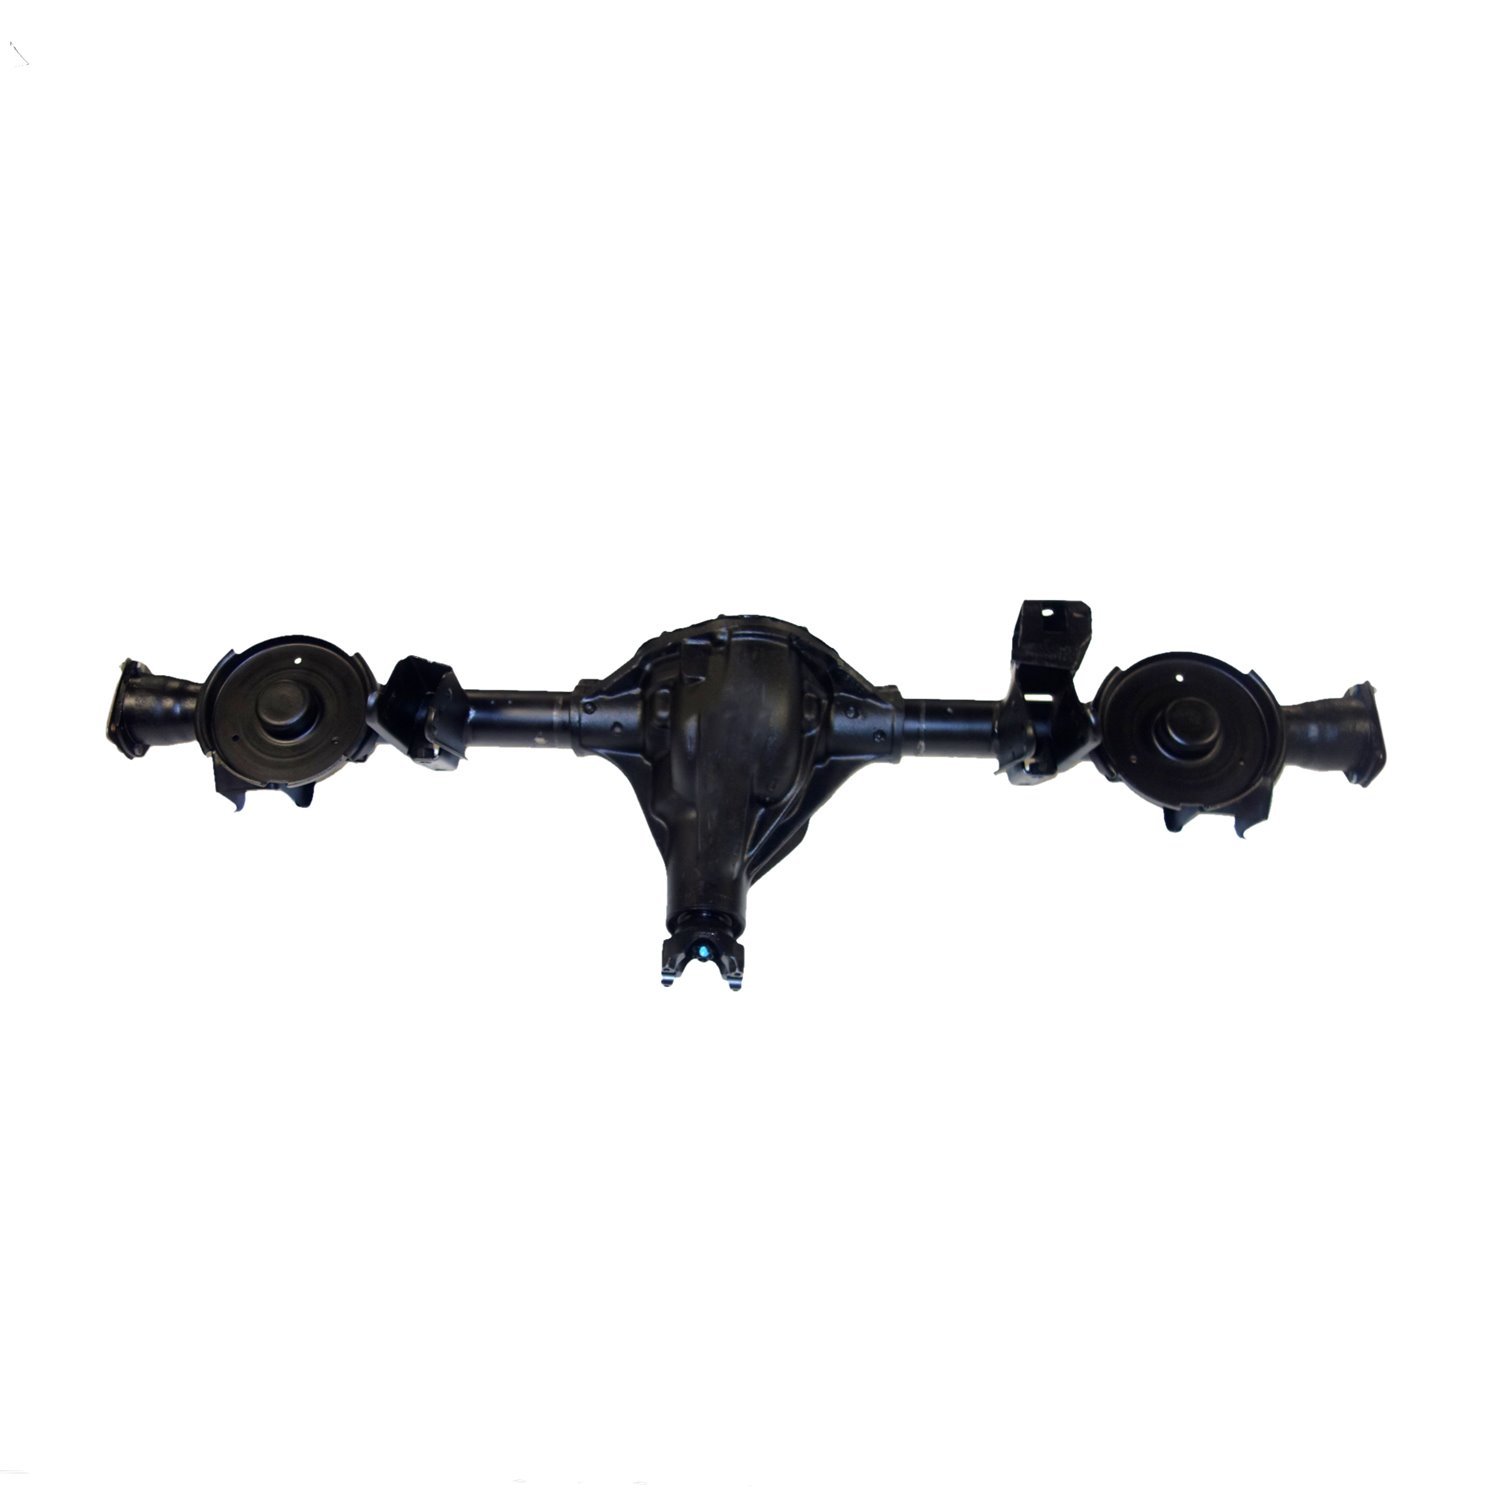 Remanufactured Complete Axle Assembly for Dana 44 97-99 Jeep Wrangler 3.55 Ratio